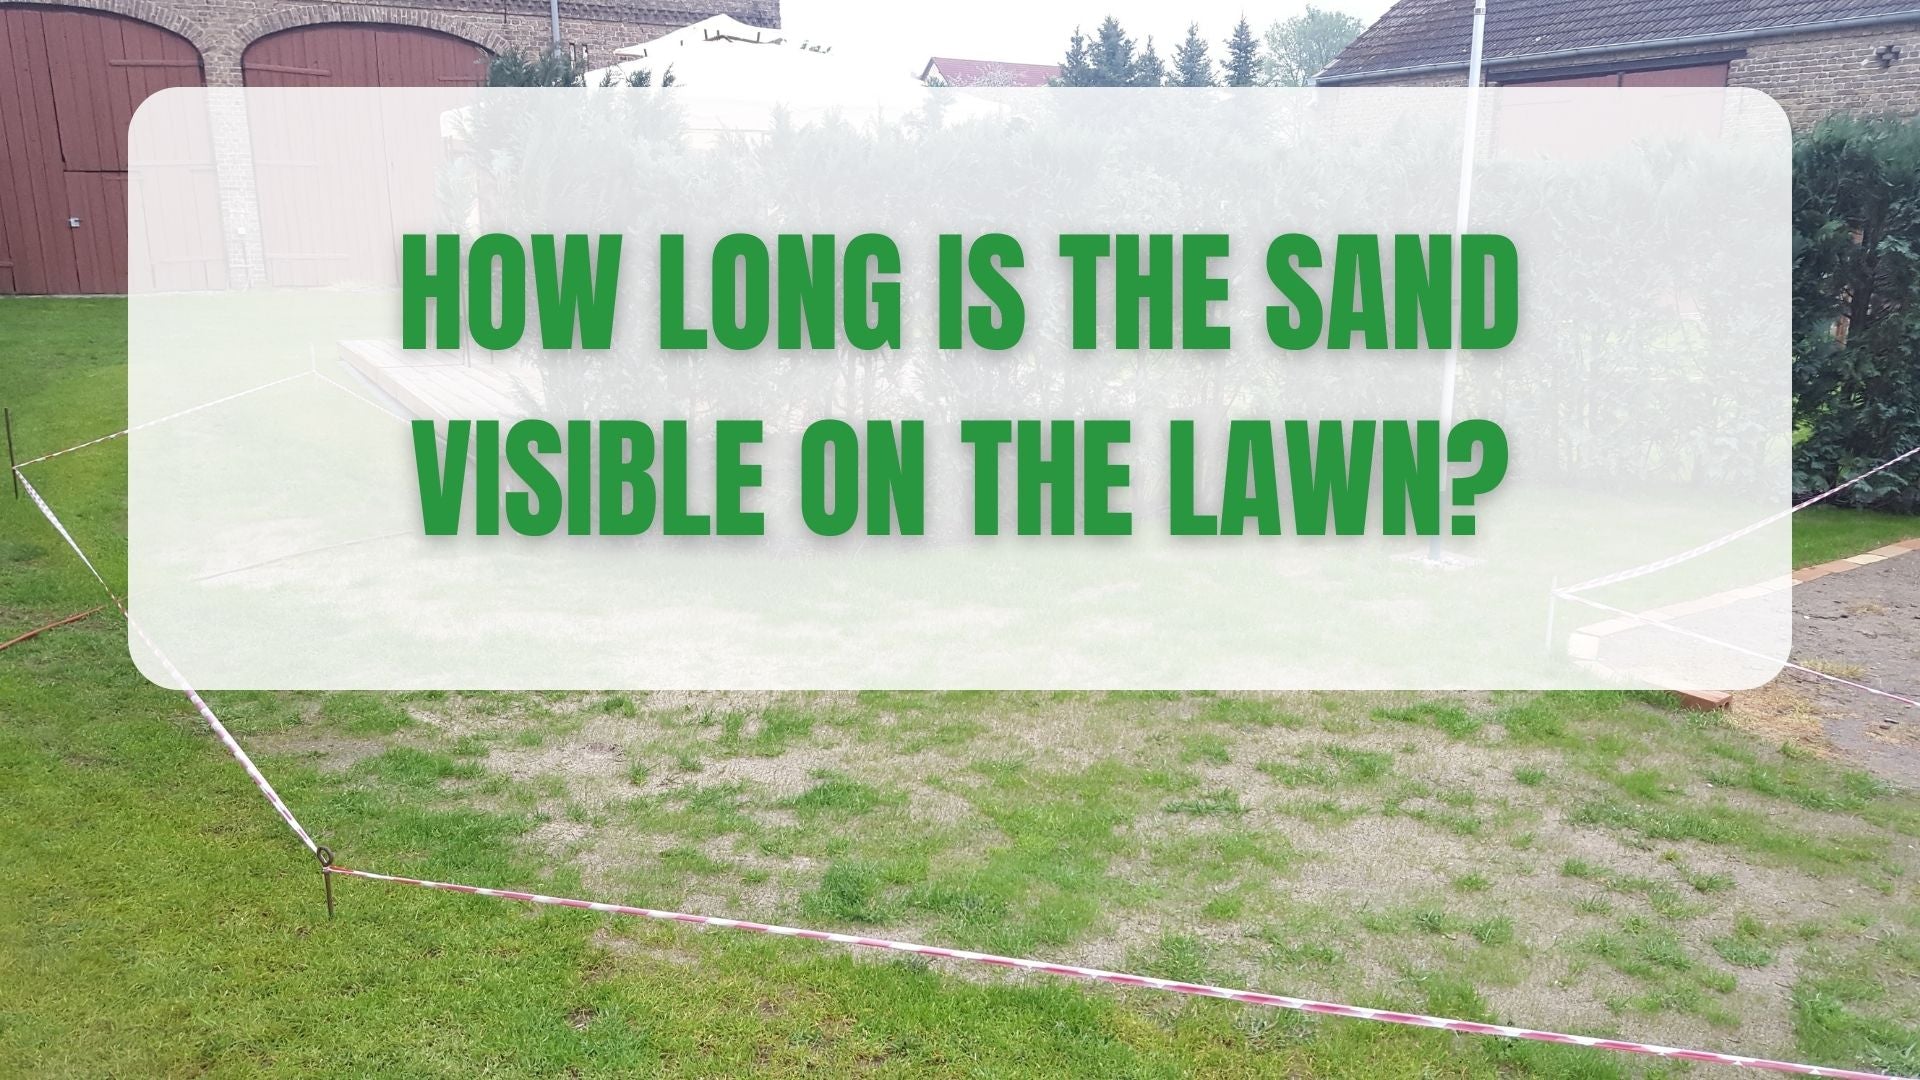 How long is the sand visible on the lawn?